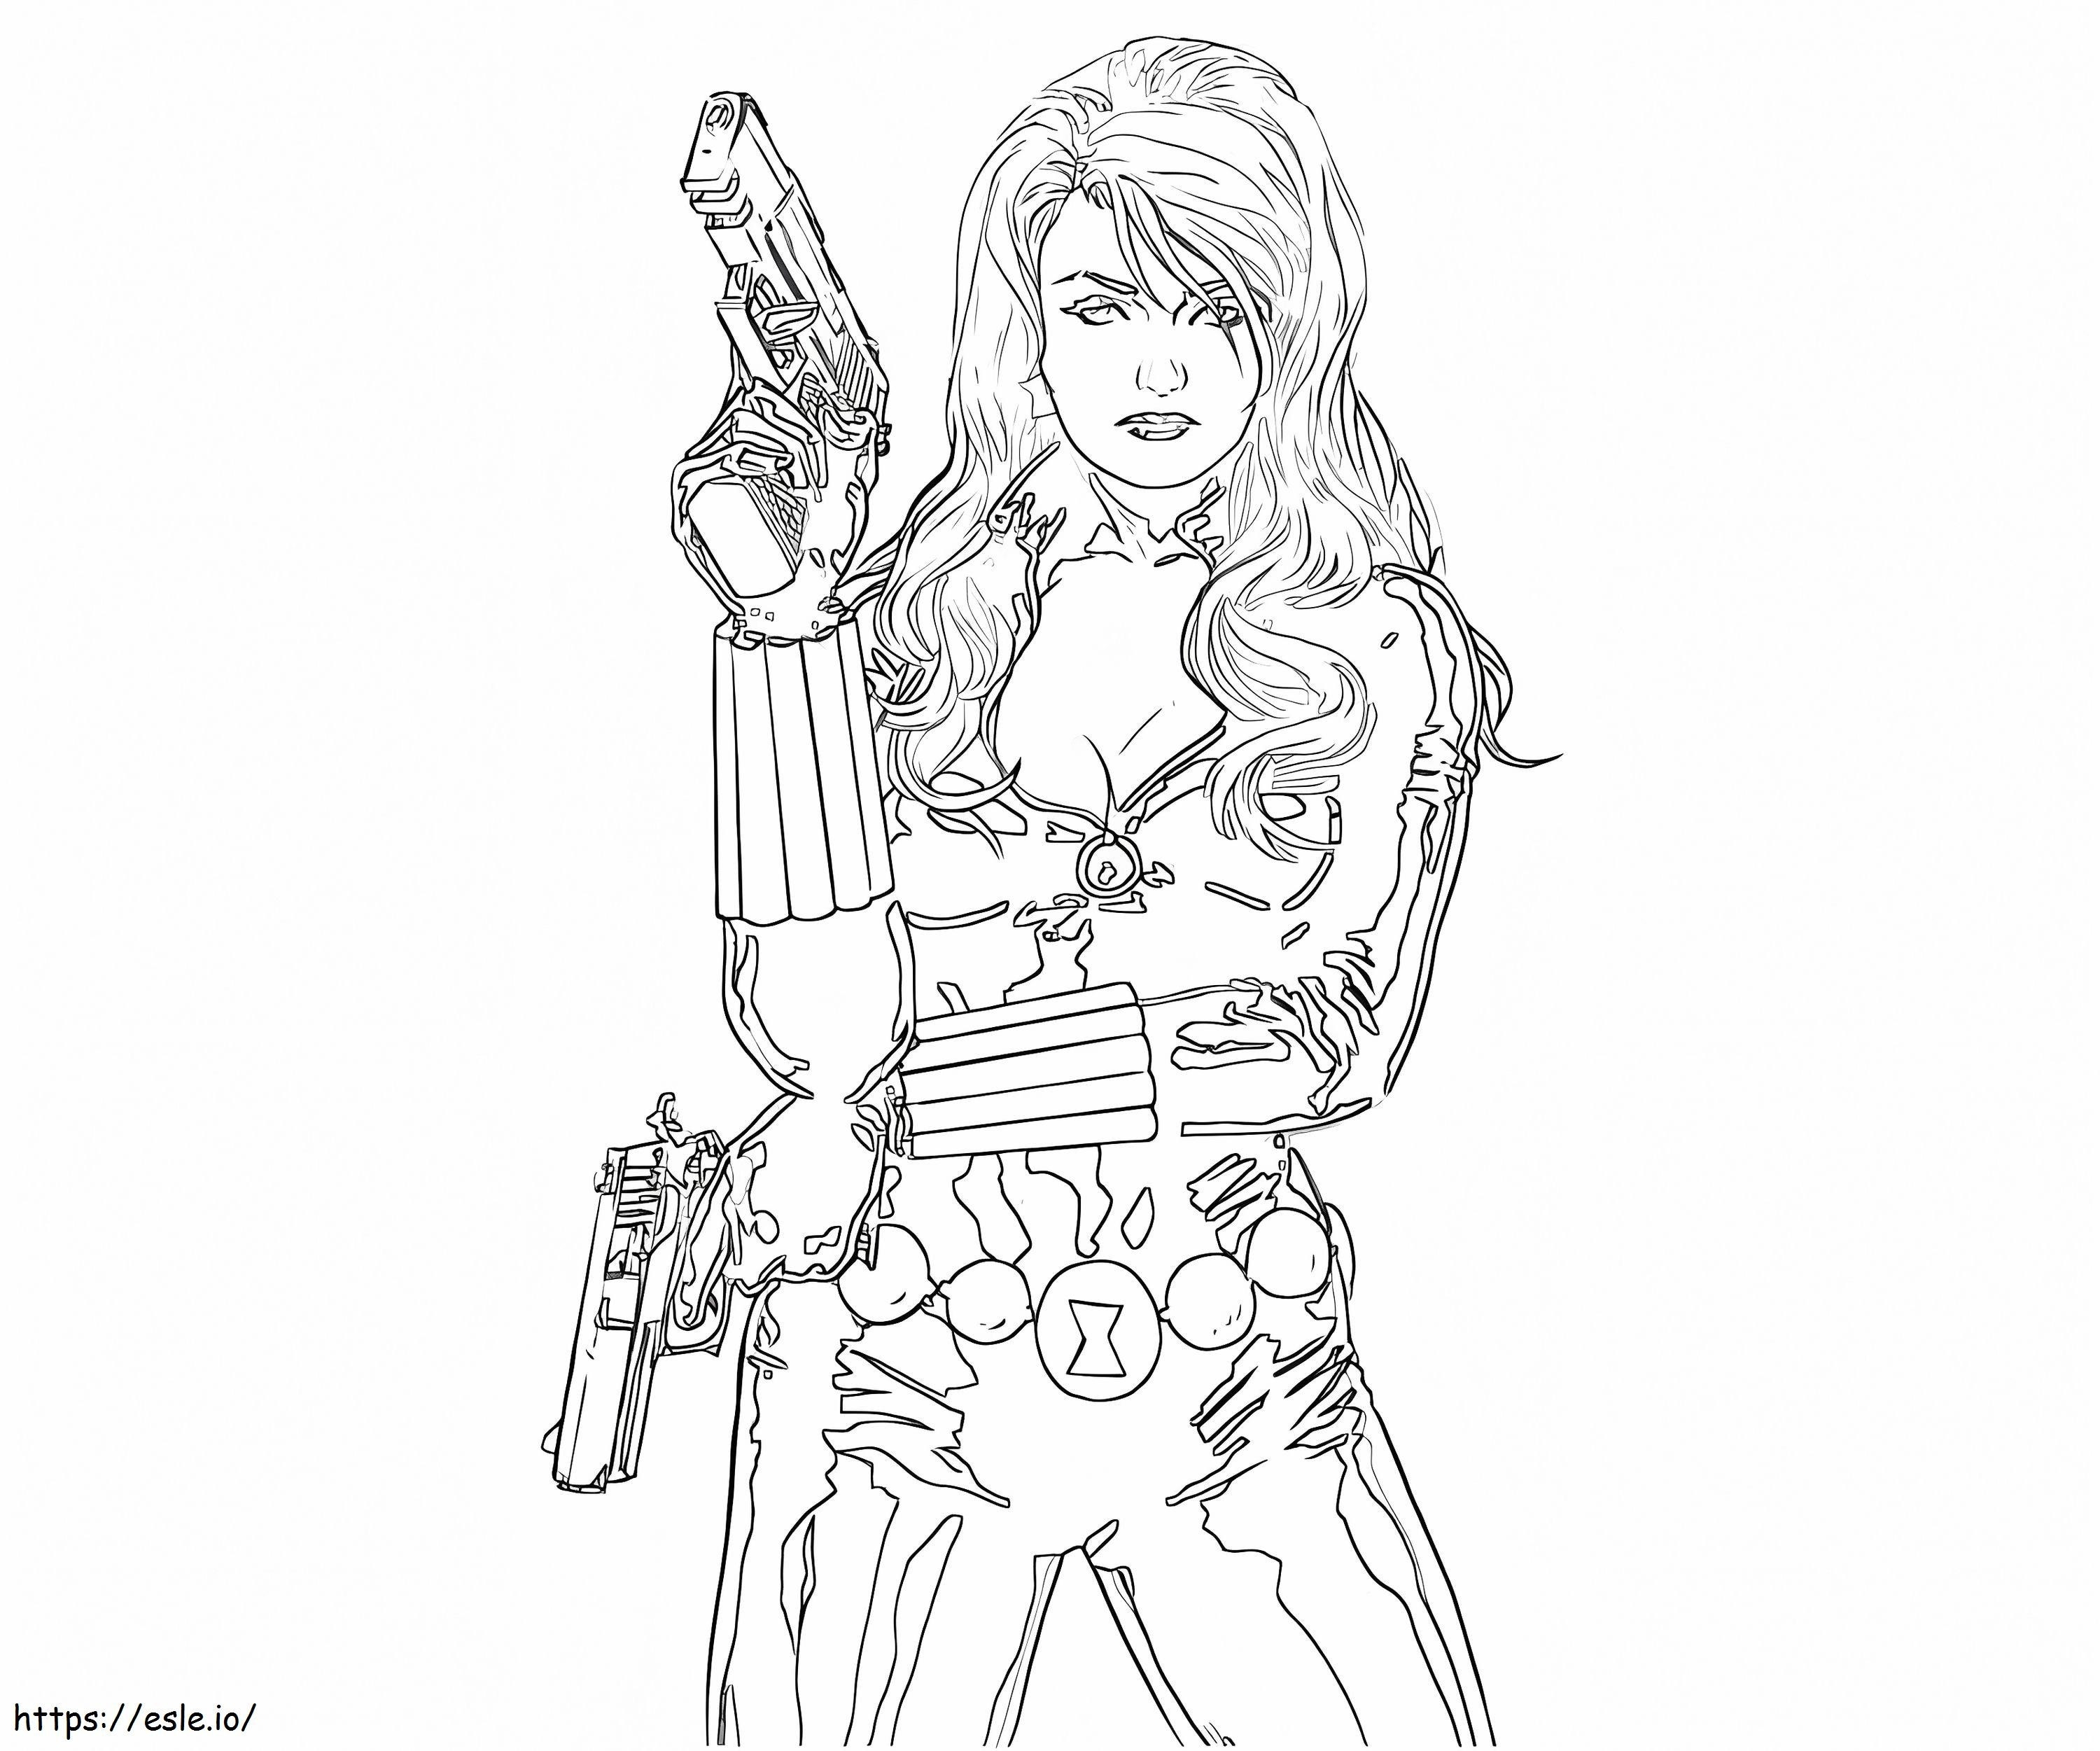 Black Widow 2 coloring page